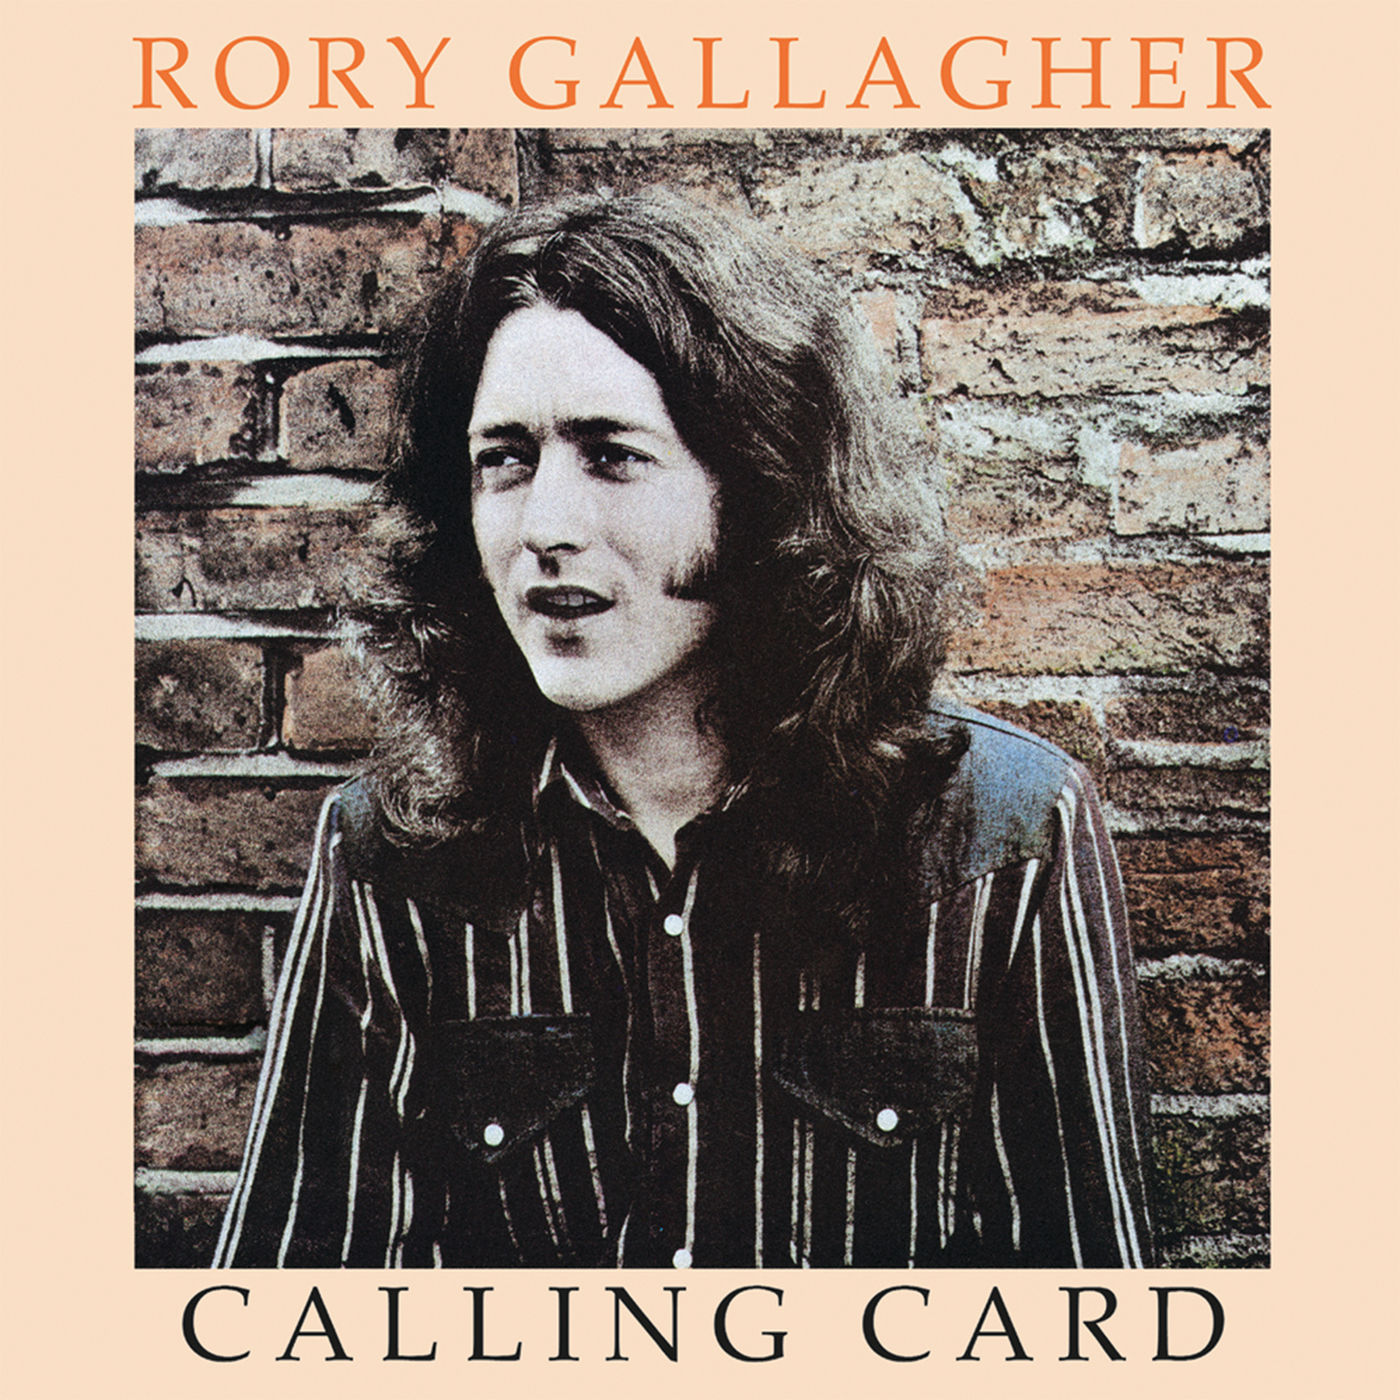 Rory Gallagher - Calling Card (Remastered) (1976/2020) [FLAC 24bit/96kHz]